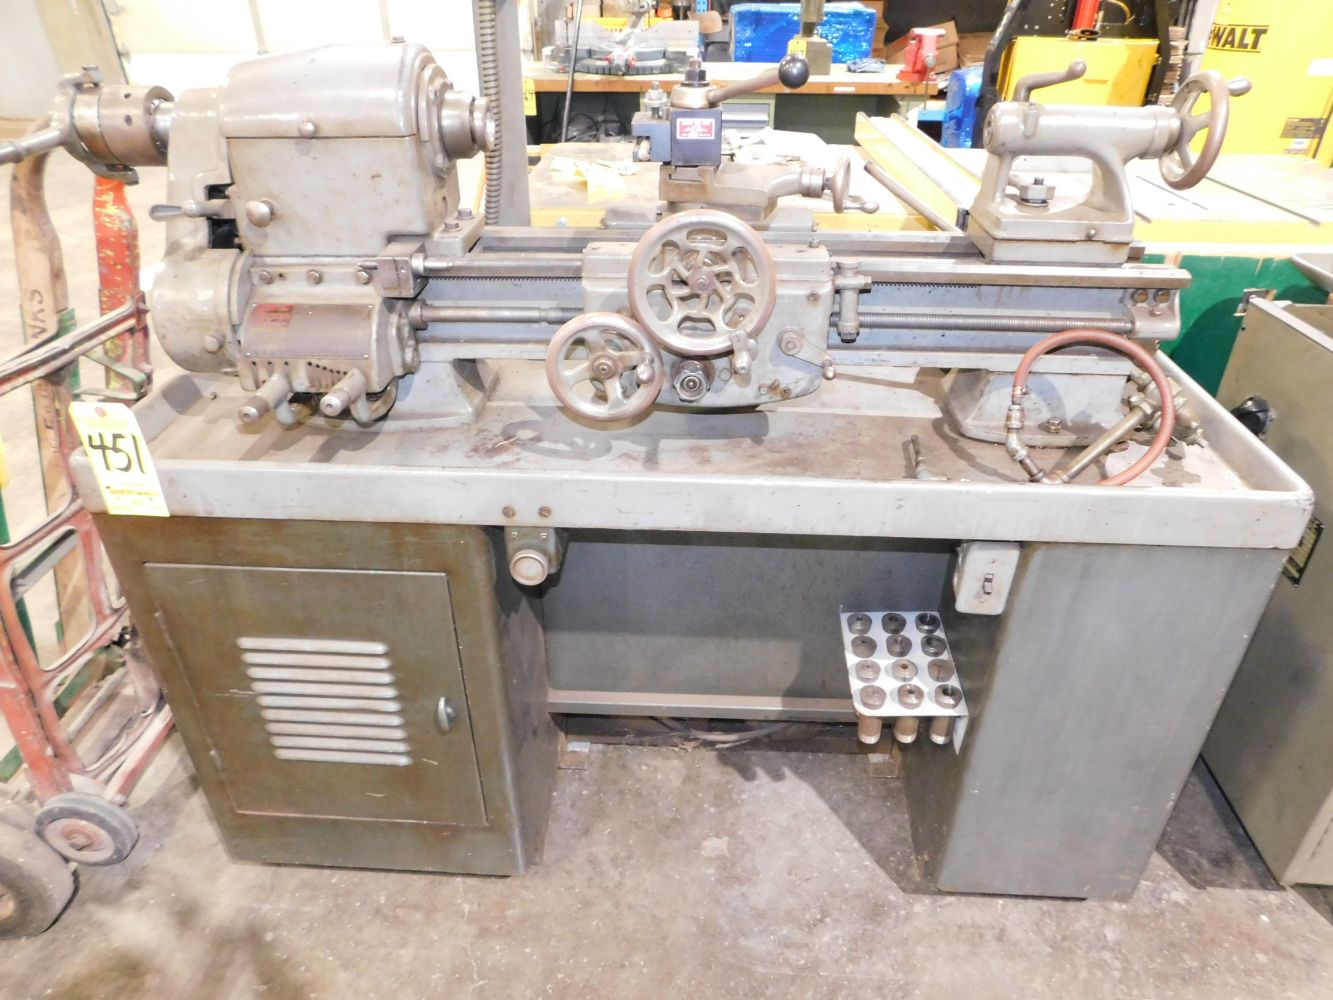 Dayton-Area Machines & Tooling - HUGE Auction - Over 700 Lots